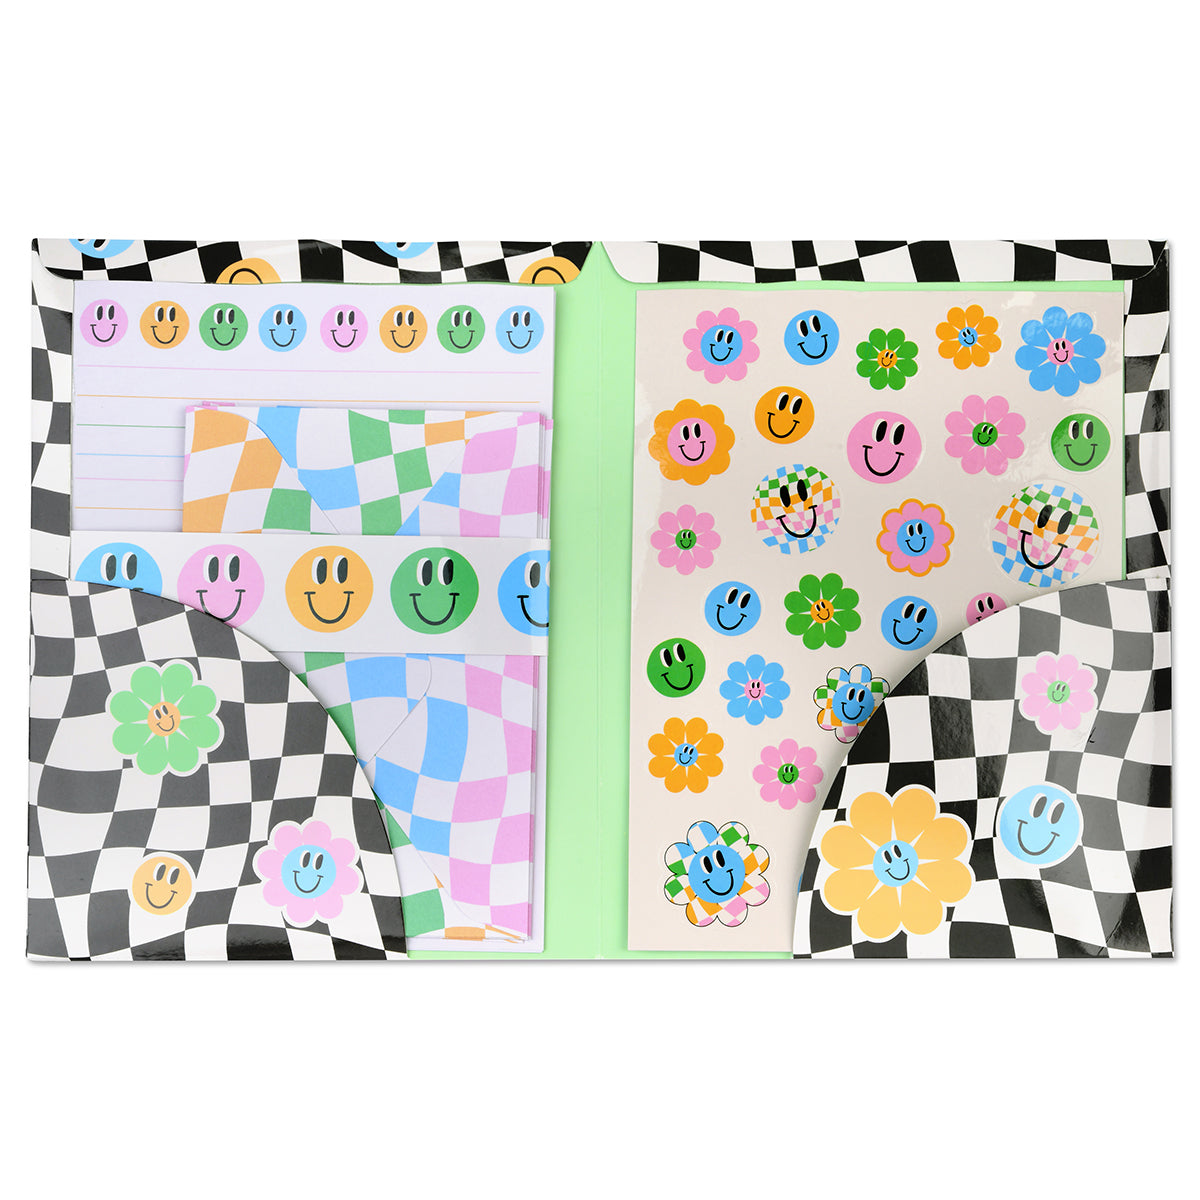 Good Times Pen Pal Stationery Set Cover